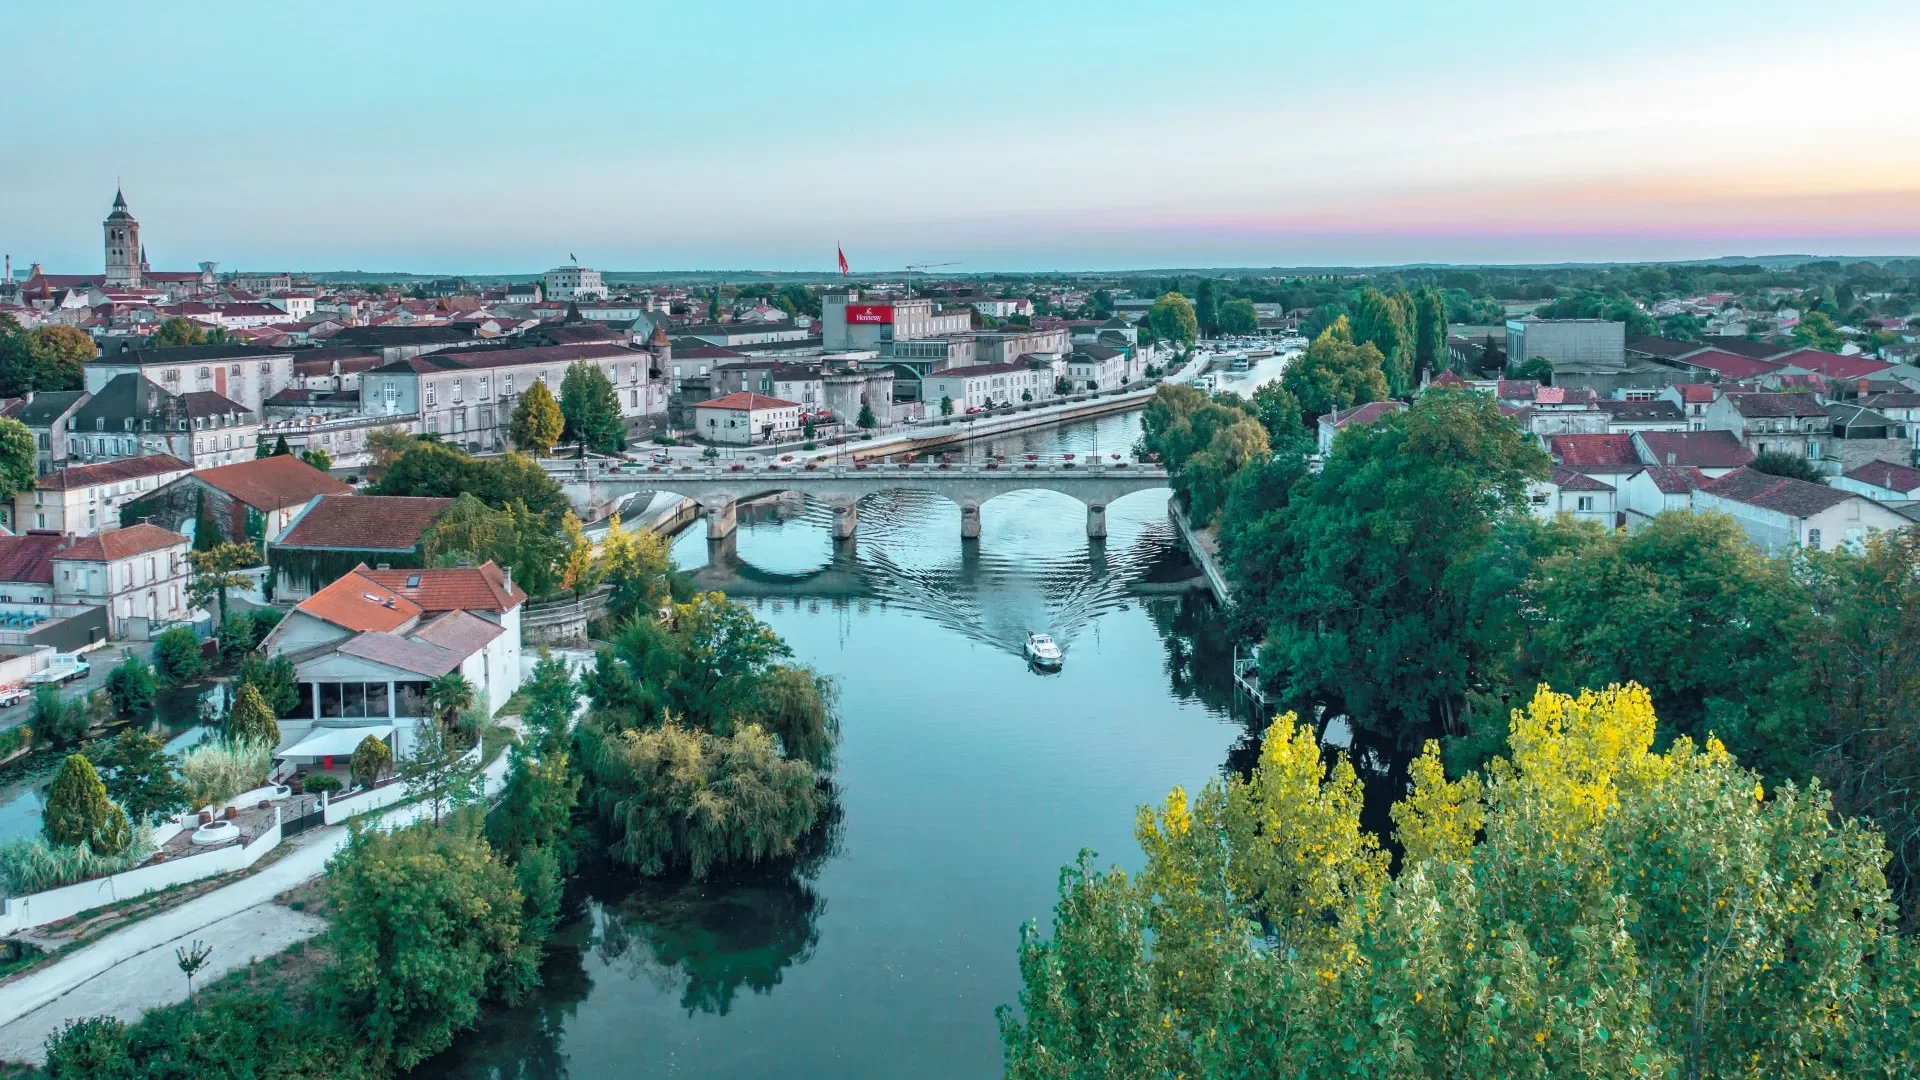 Aerial view of the town of Cognac, in particular the river Charente, the Pont neuf also known as the Pont Saint Jacques, the Chateau de Cognac, the tous saint Jacques, and the quays along which the Otard and Hennessy trading houses are located.